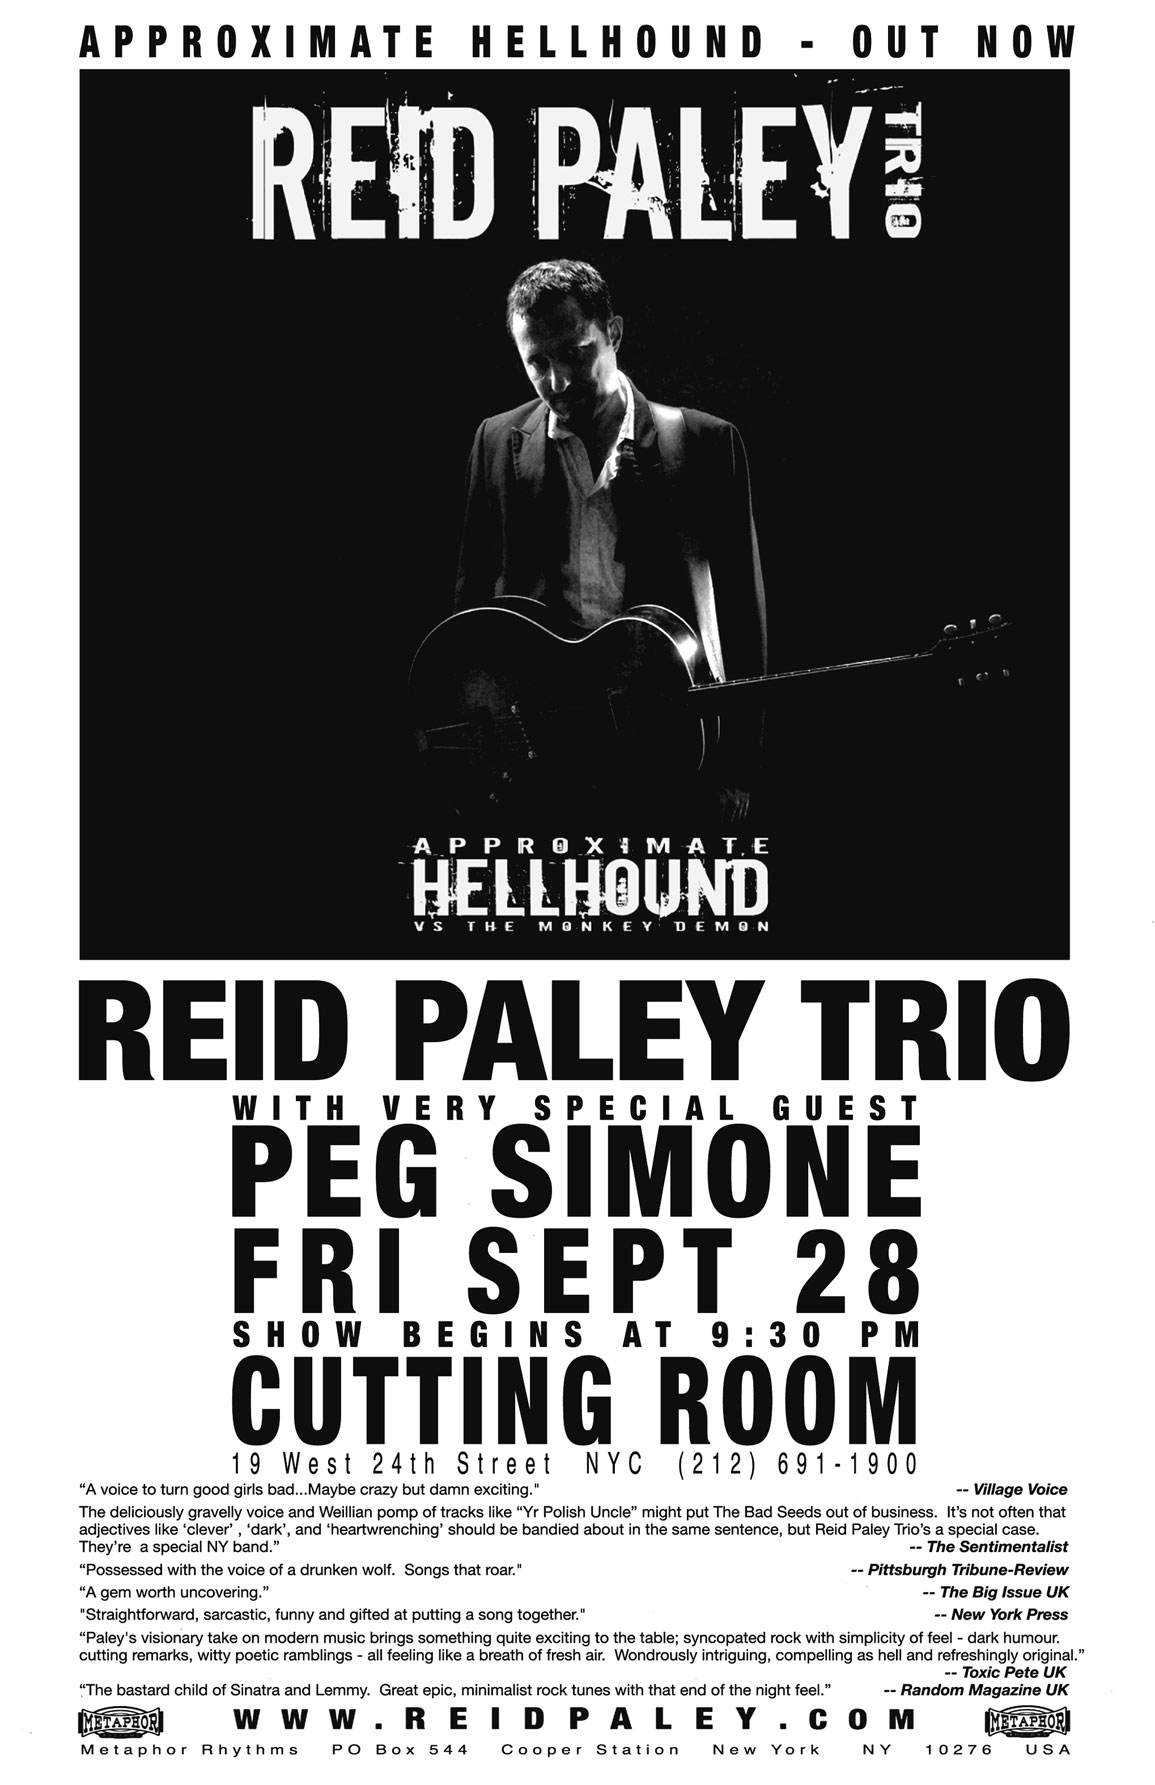 REID PALEY TRIO at the Cutting Room with Peg Simone 2007